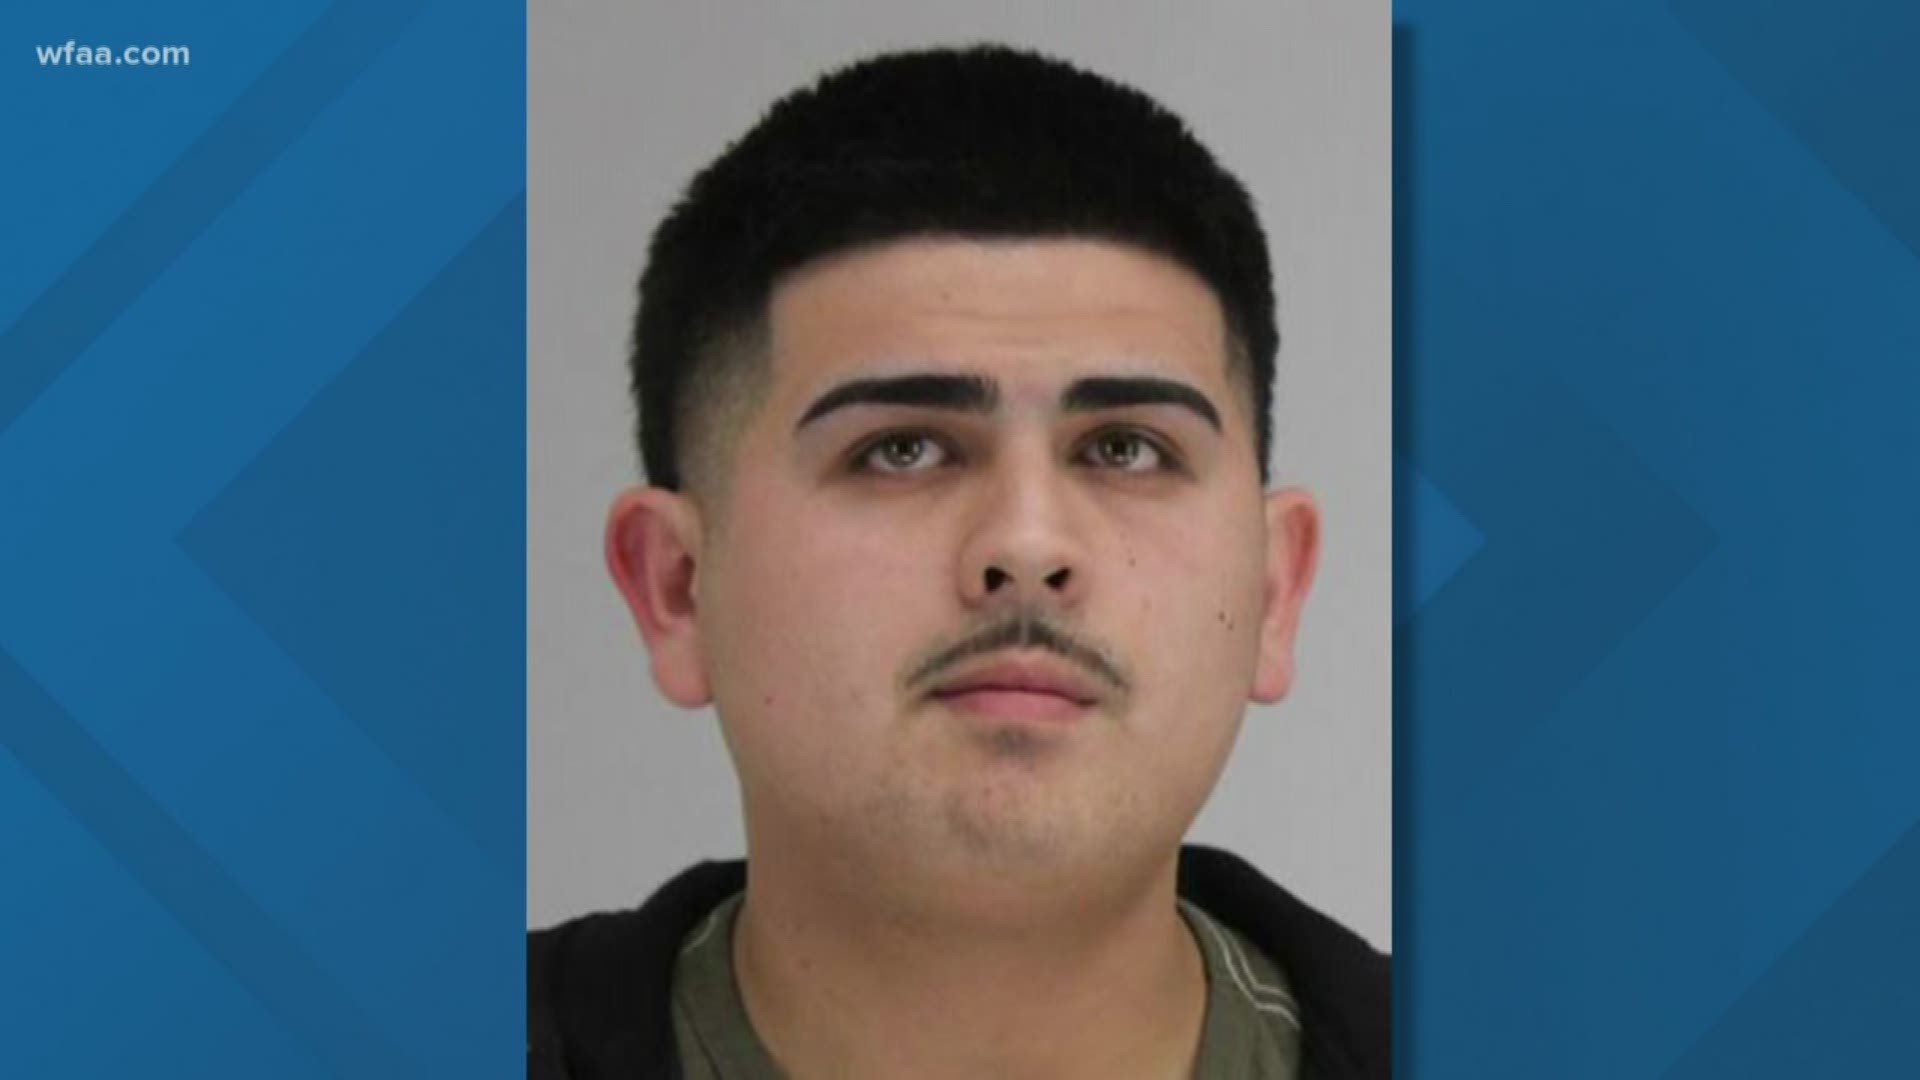 Rene Eduardo Montanez Jr., 23, has been charged with capital murder for his role in the killing of Joseph Pintucci, Dallas Police said Sunday.